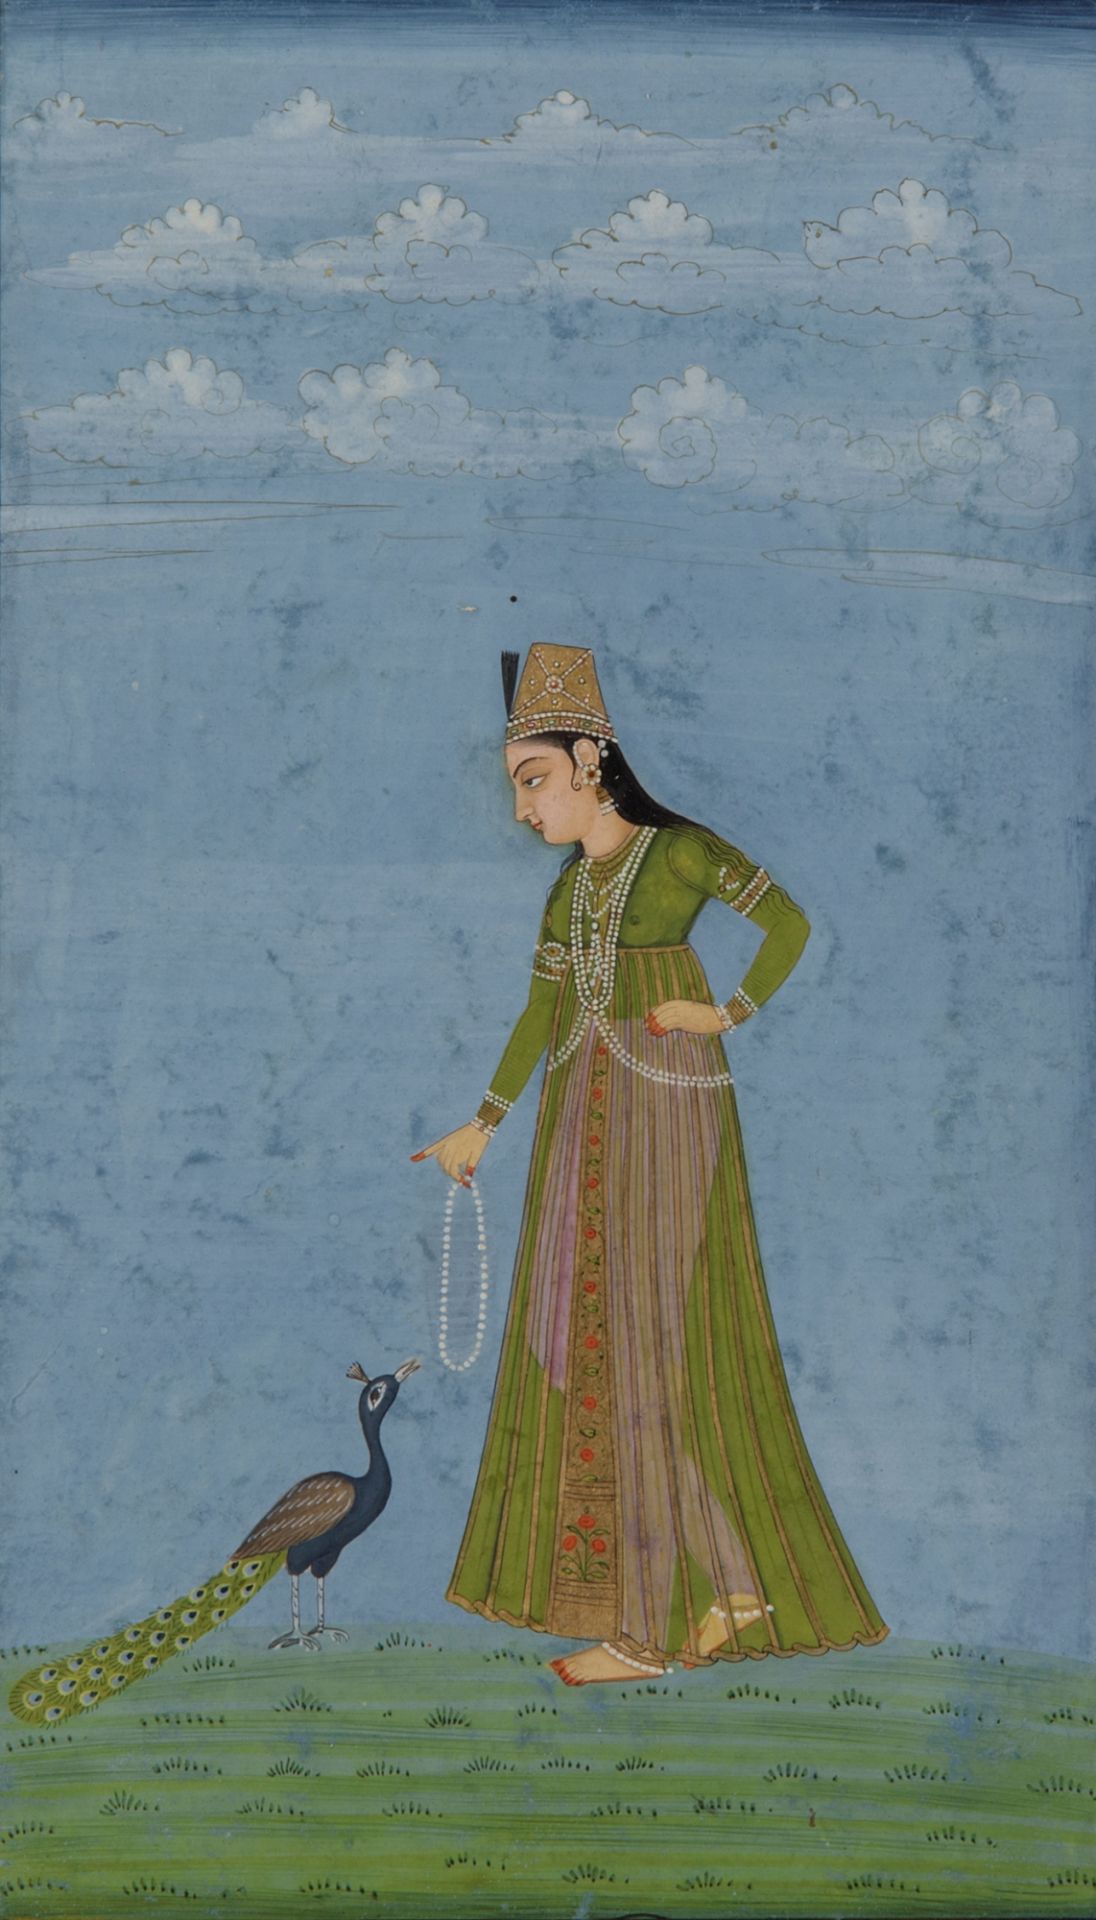 A Indian miniature depicting a lady and a peacock